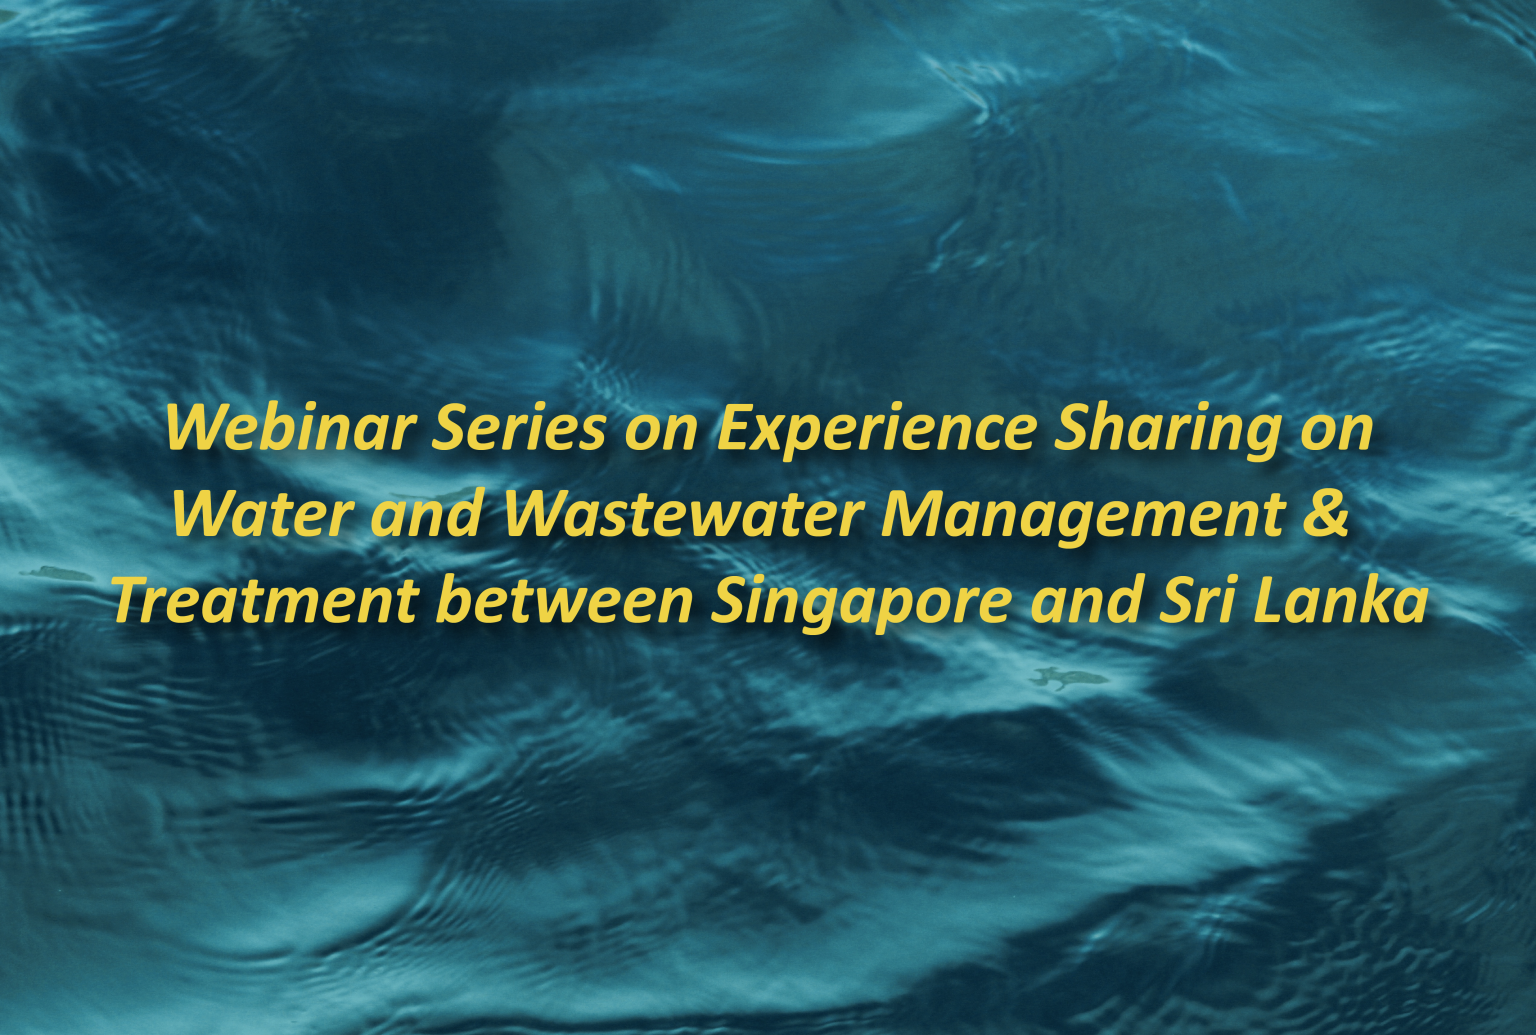 Experience Sharing on Water and Wastewater Management & Treatment between Singapore and Sri Lanka-01